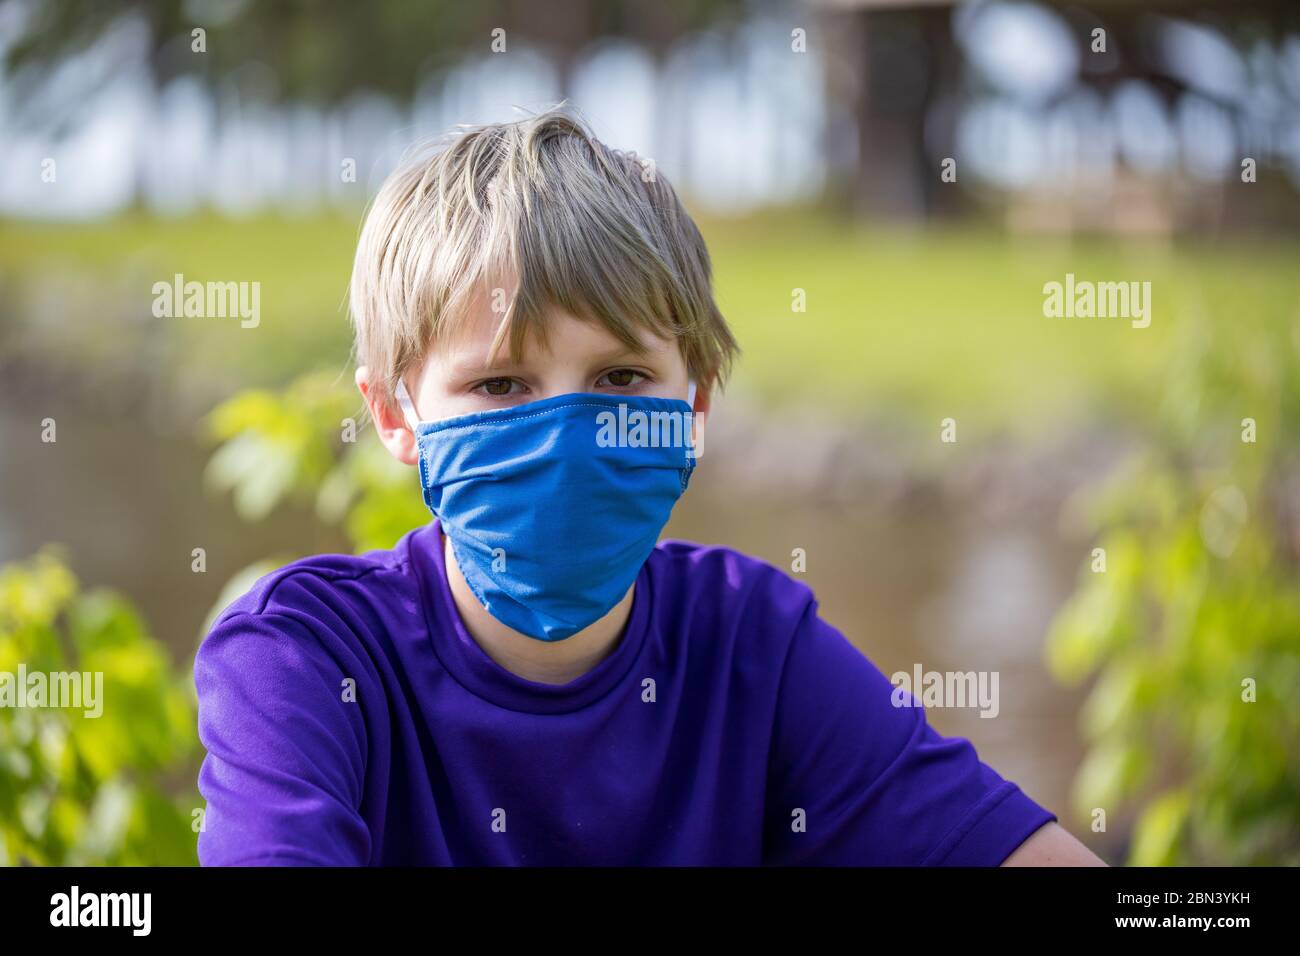 Person wearing a homemade face mask while in public, to prevent from getting sick during pandemic Stock Photo